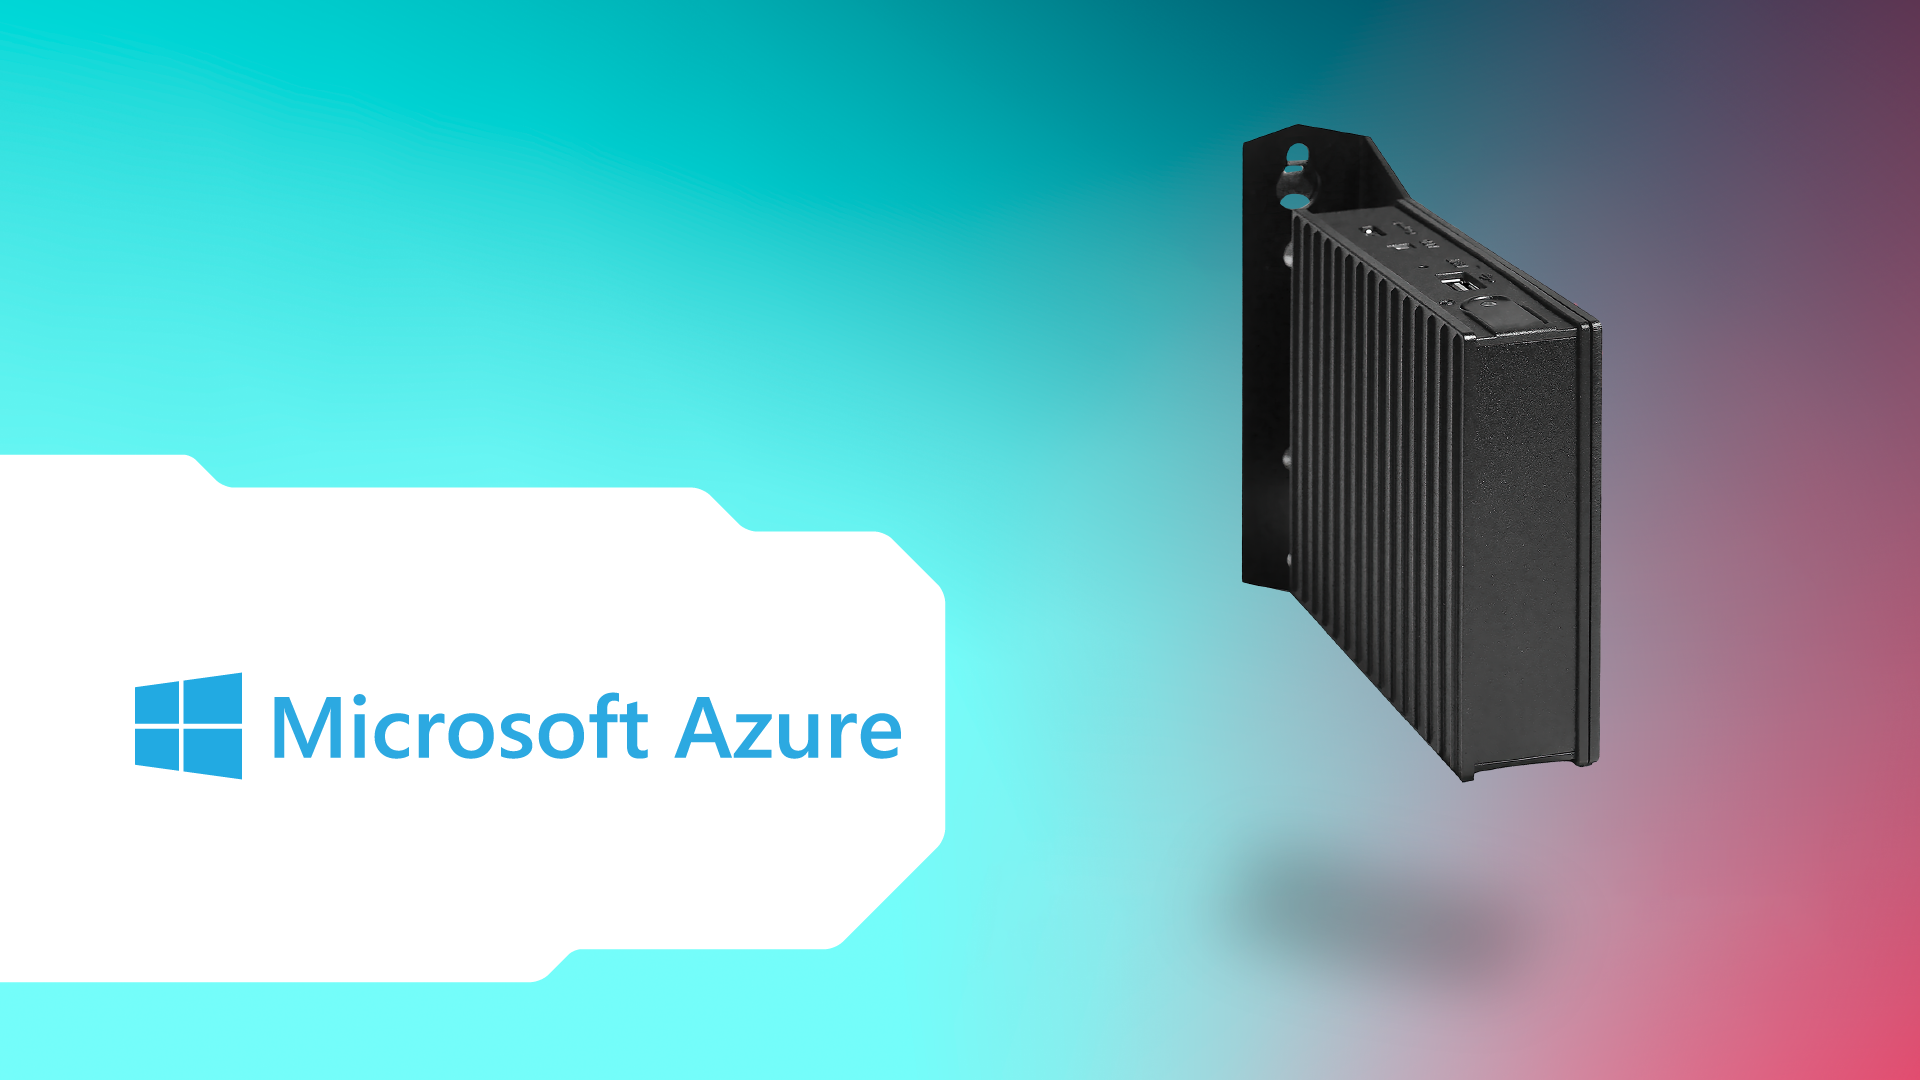 A black device hovers on a colorful background. On the lft you can see the Microsoft Azure logo in blue on a white background.